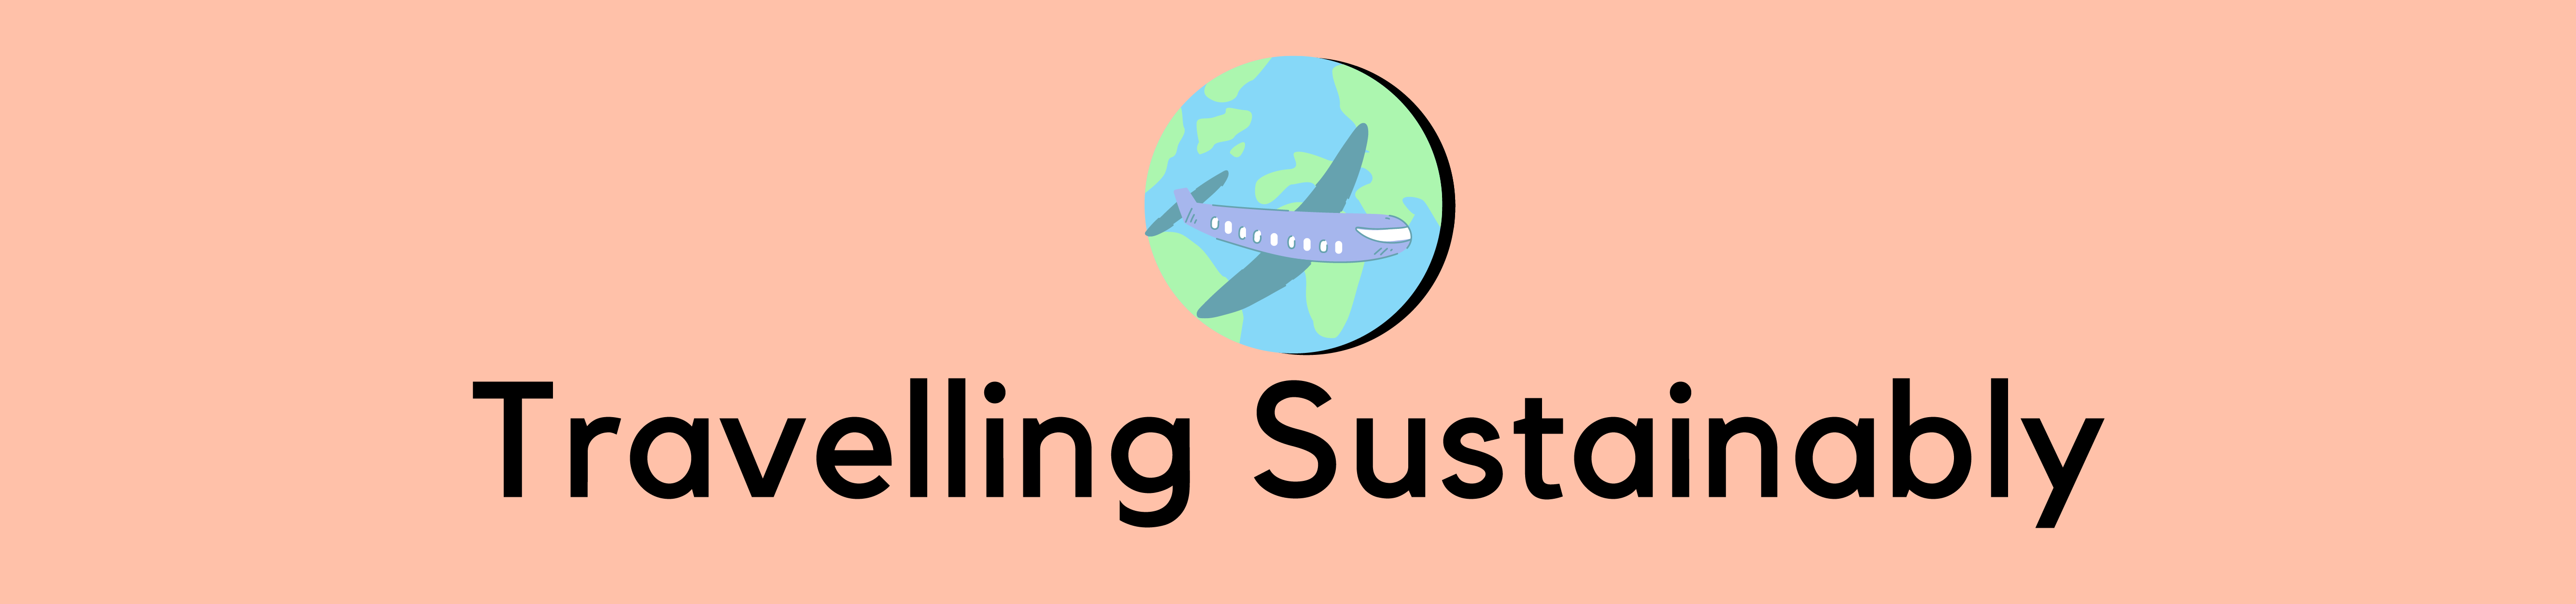 Travelling Sustainably header